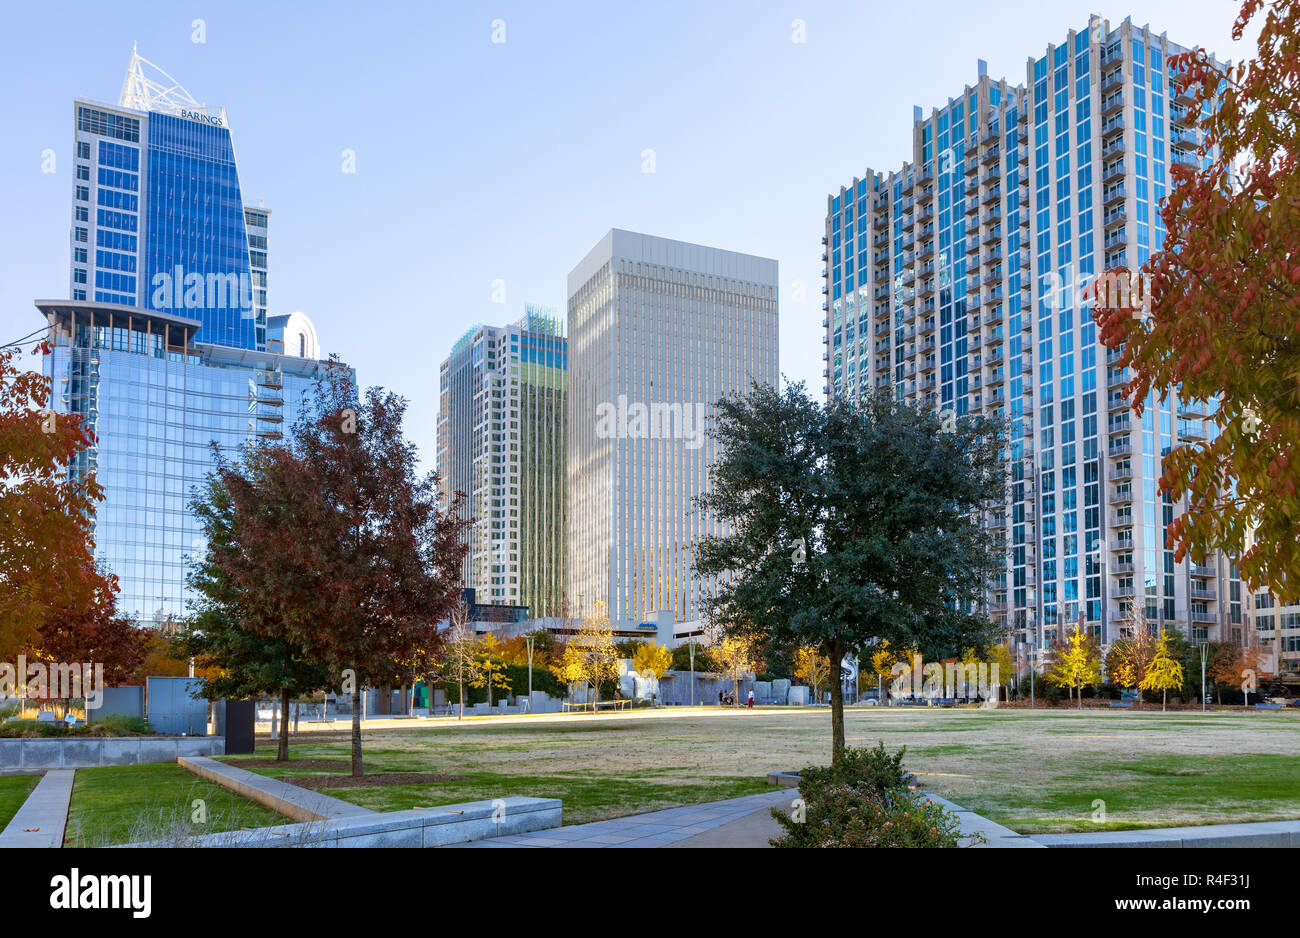 CHARLOTTE, NC, USA-11/21/18: Romare Bearden Park, with skyscrapers in the background. Stock Photo